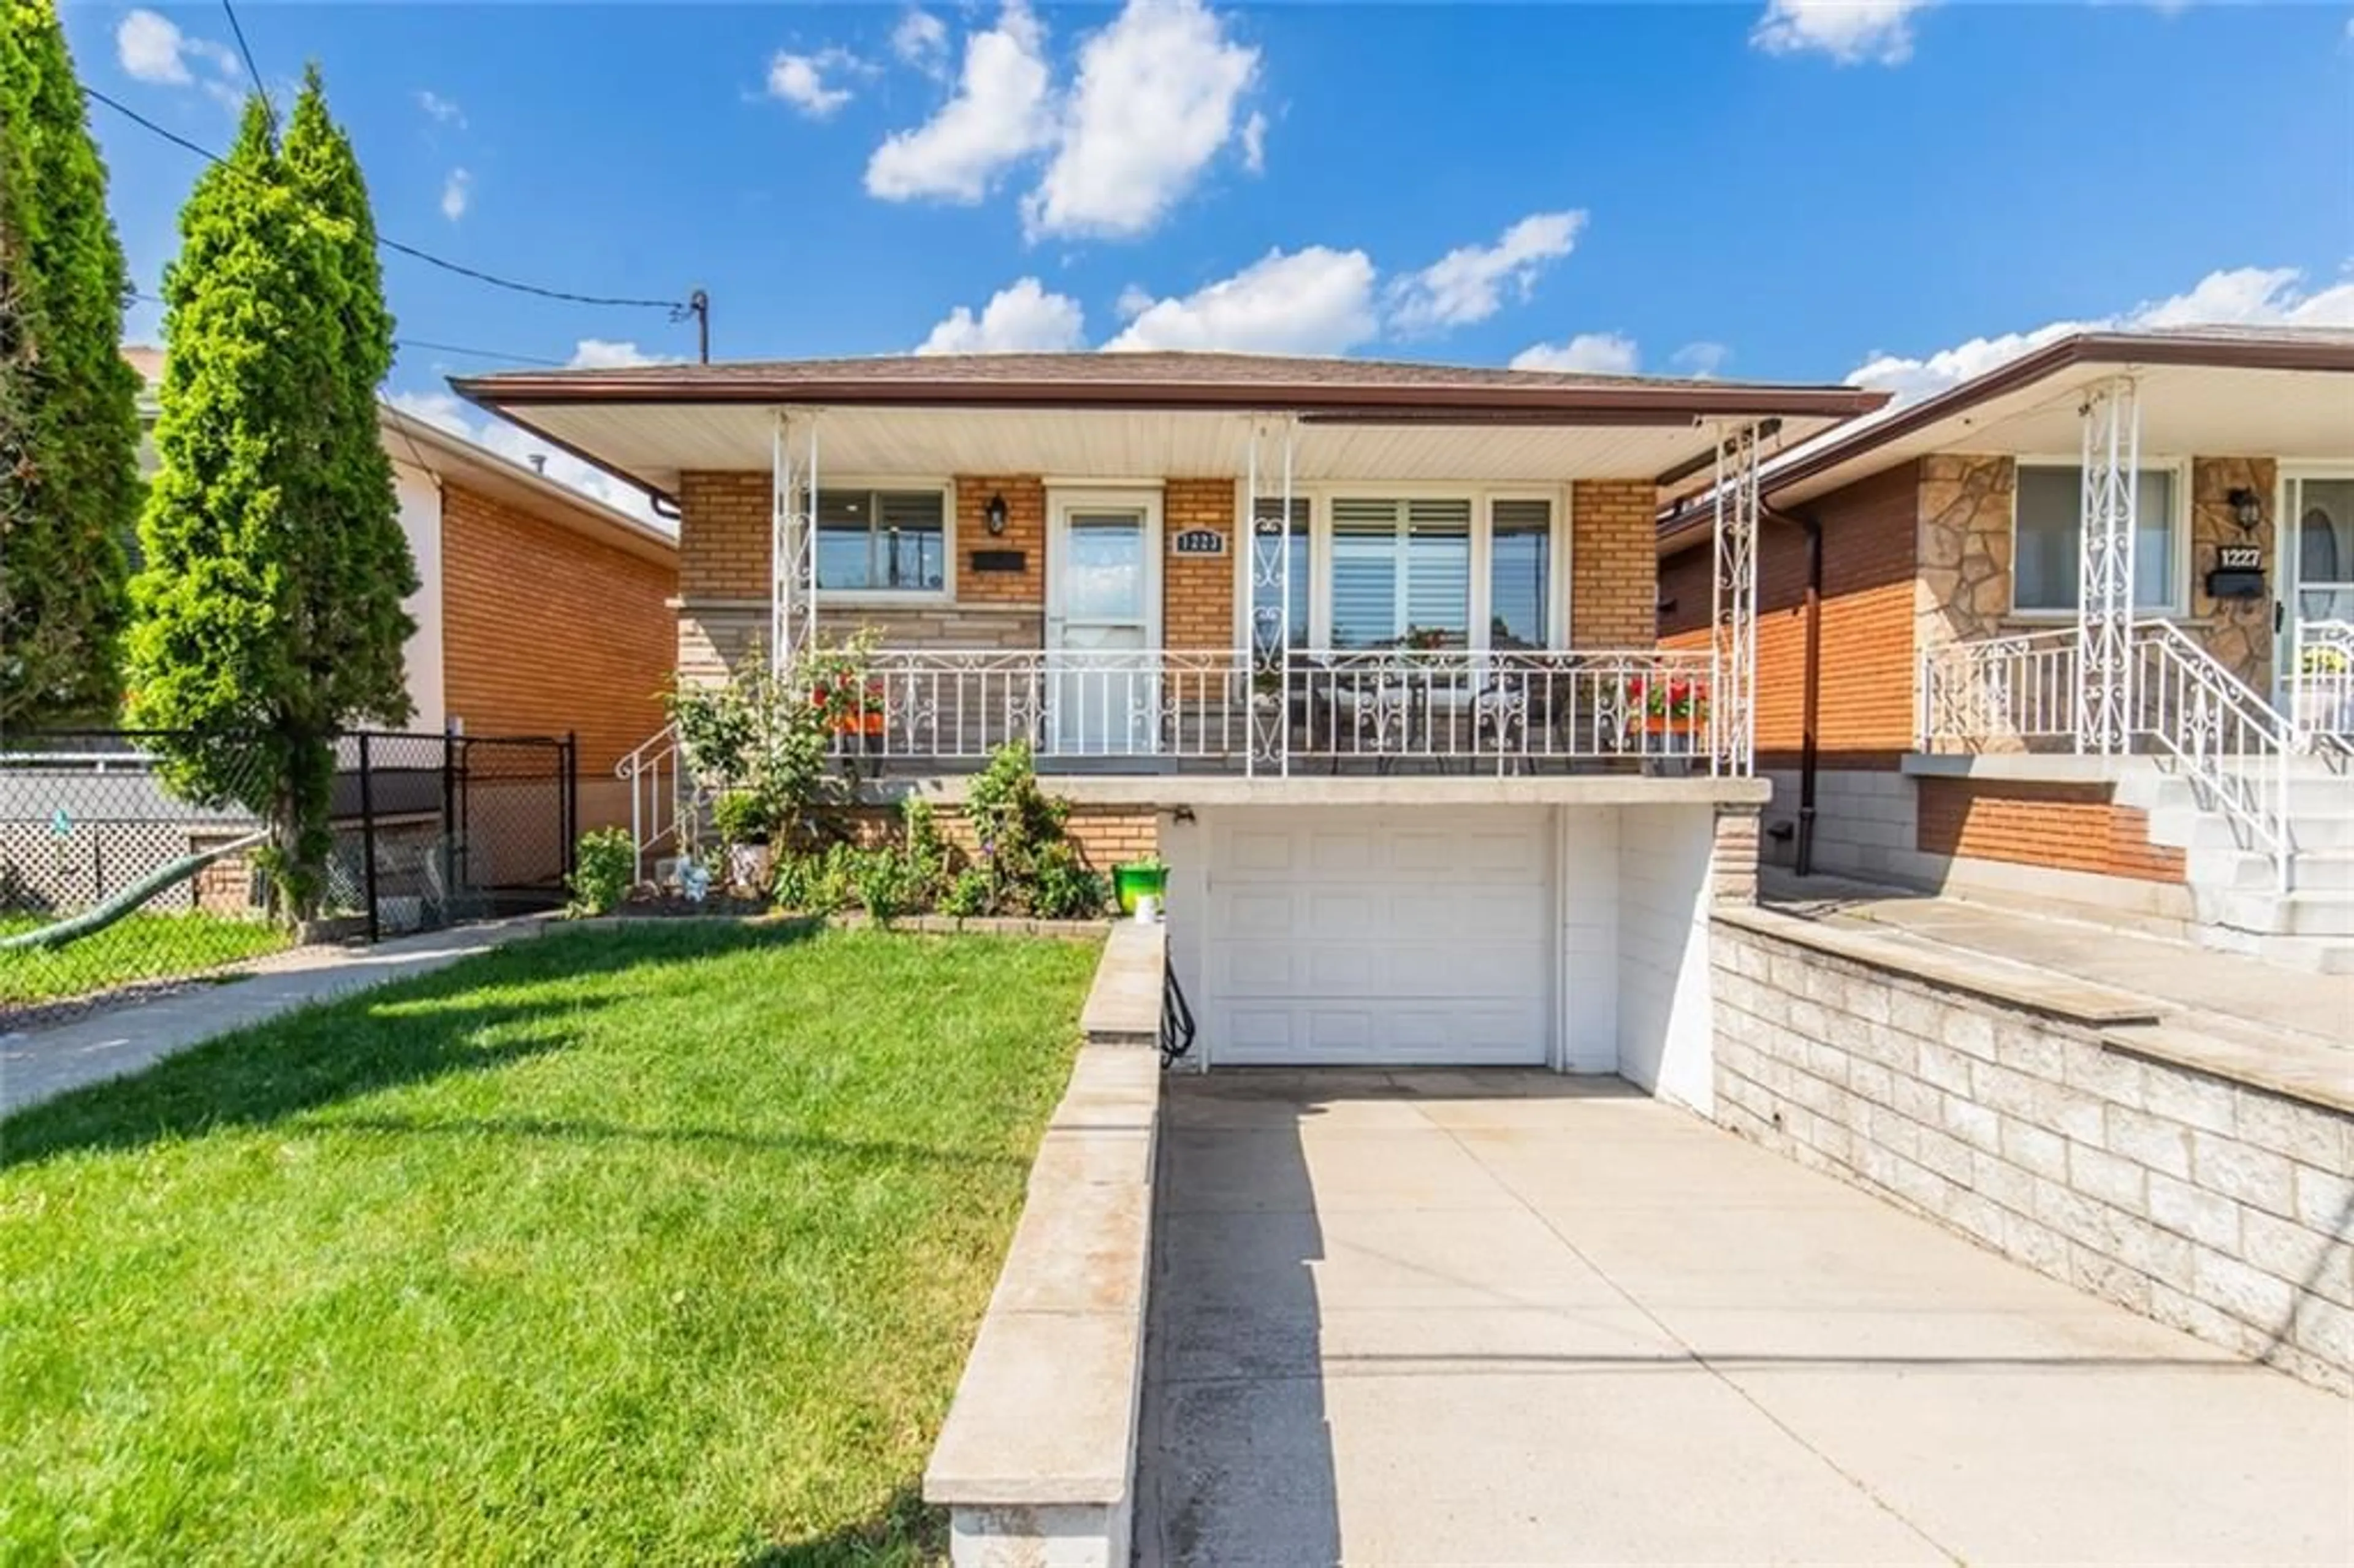 Frontside or backside of a home for 1223 Dunsmure Rd, Hamilton Ontario L8H 1L5